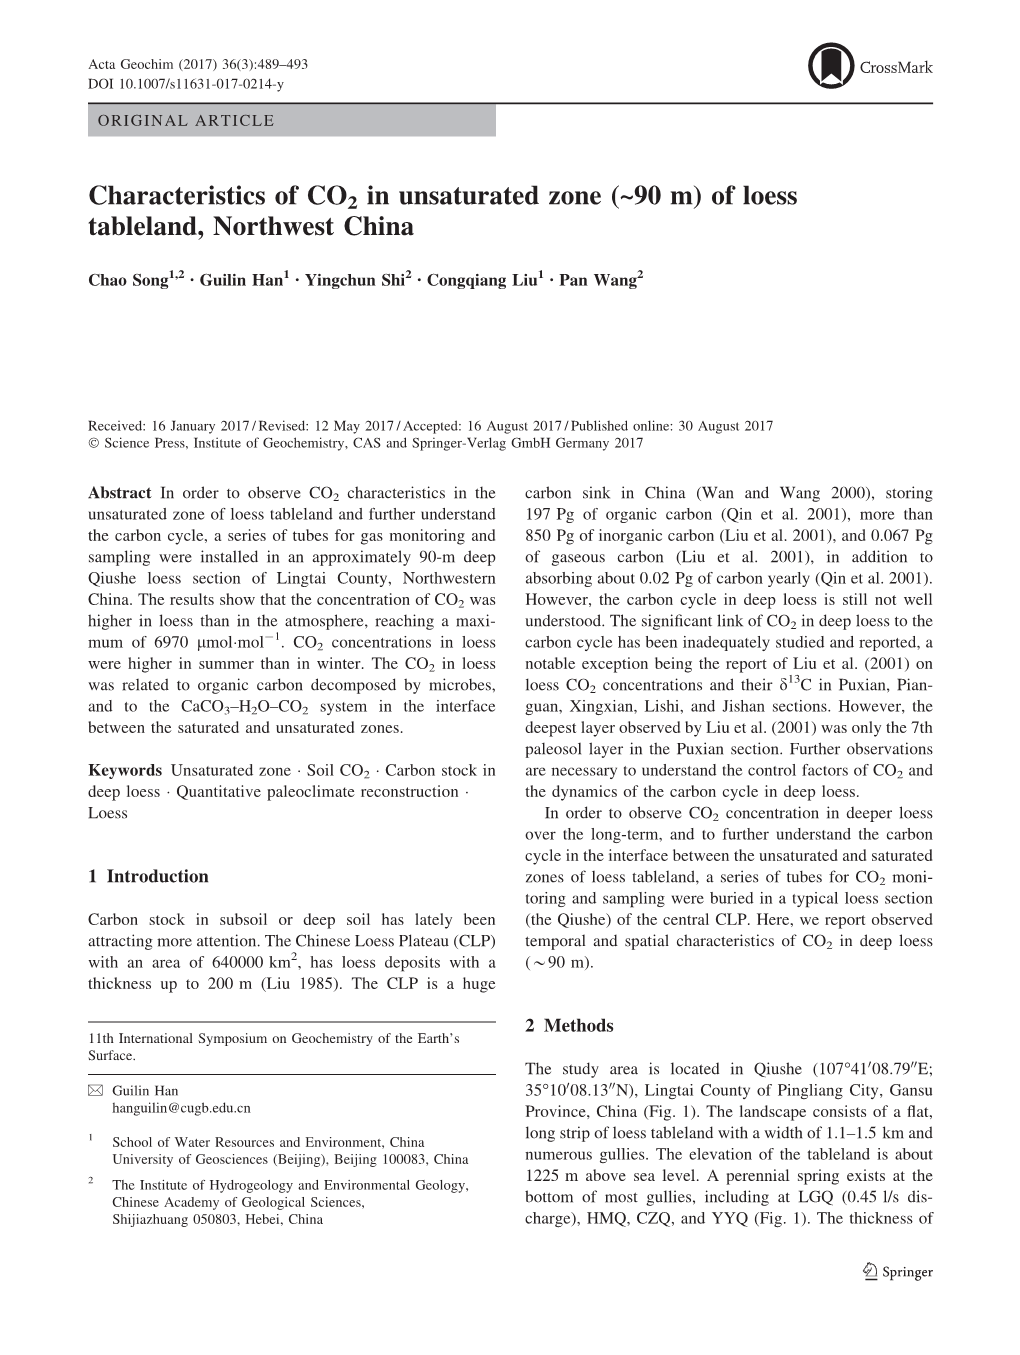 Characteristics of CO2 in Unsaturated Zone (~90 M) of Loess Tableland, Northwest China